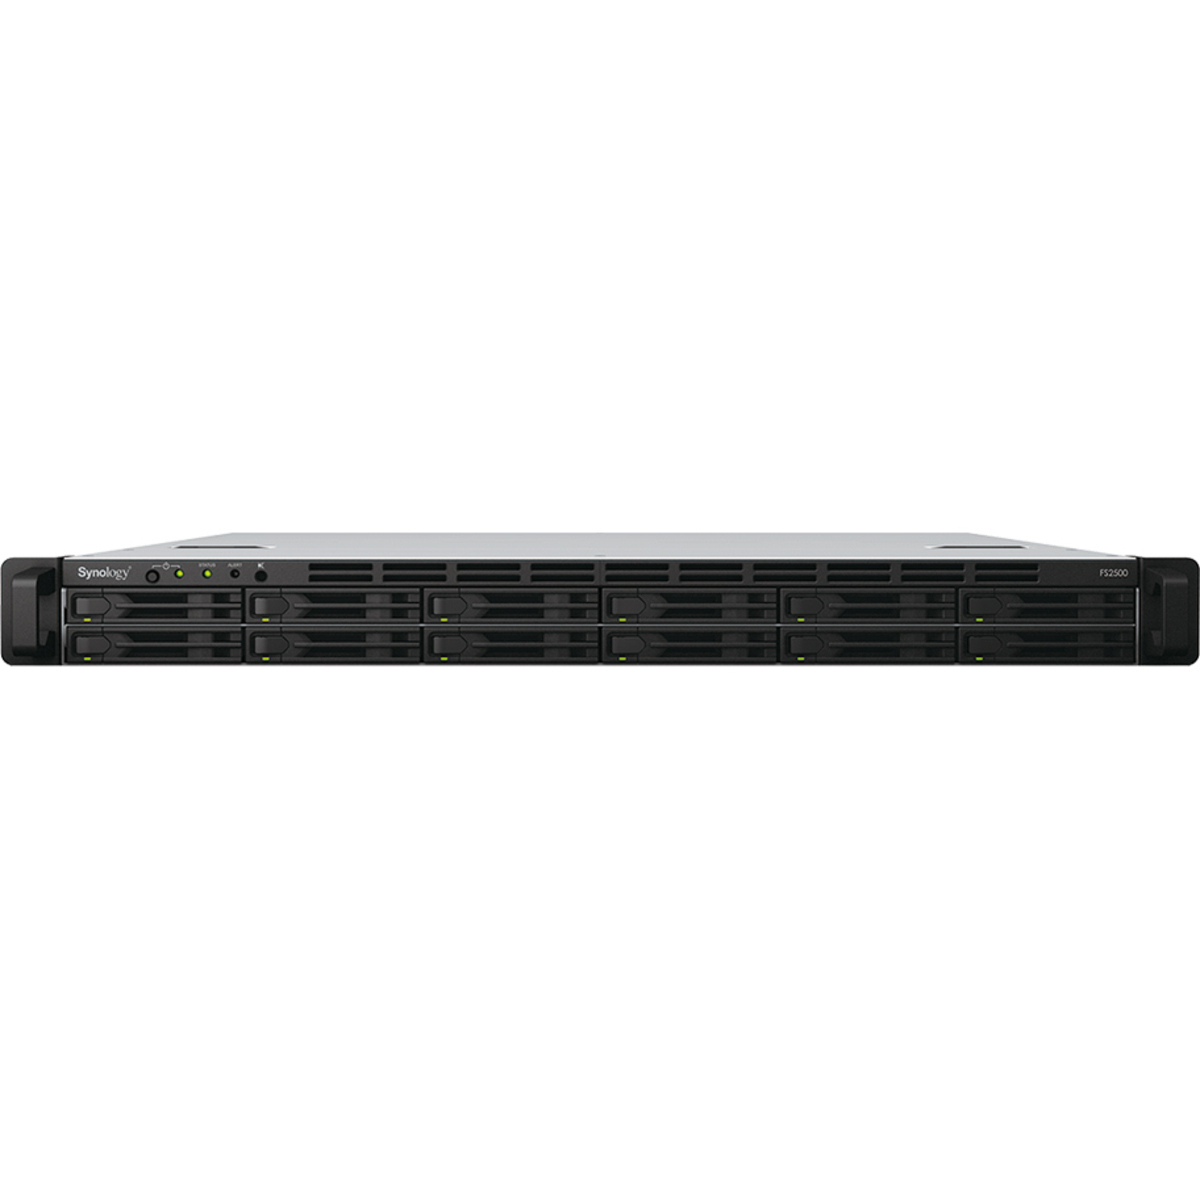 Synology FlashStation FS2500 48tb 12-Bay RackMount Large Business / Enterprise NAS - Network Attached Storage Device 12x4tb Samsung 870 QVO MZ-77Q4T0 2.5 560/530MB/s SATA 6Gb/s SSD CONSUMER Class Drives Installed - Burn-In Tested - FREE RAM UPGRADE FlashStation FS2500